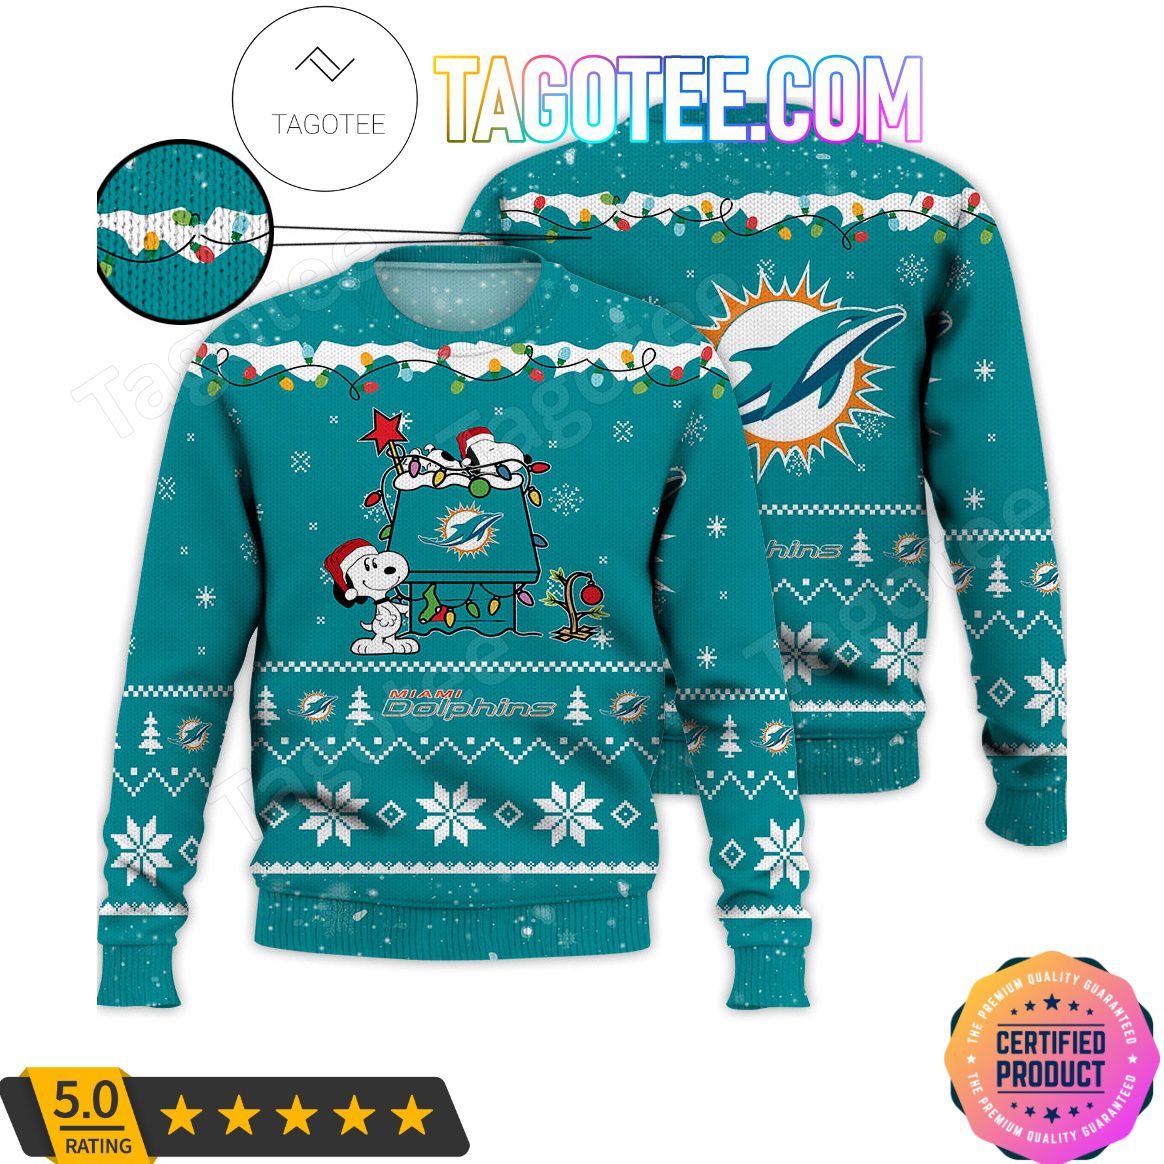 Miami Dolphins Shop - Miami Dolphins NFL Snoopy Peanuts Knitted Christmas Jumper